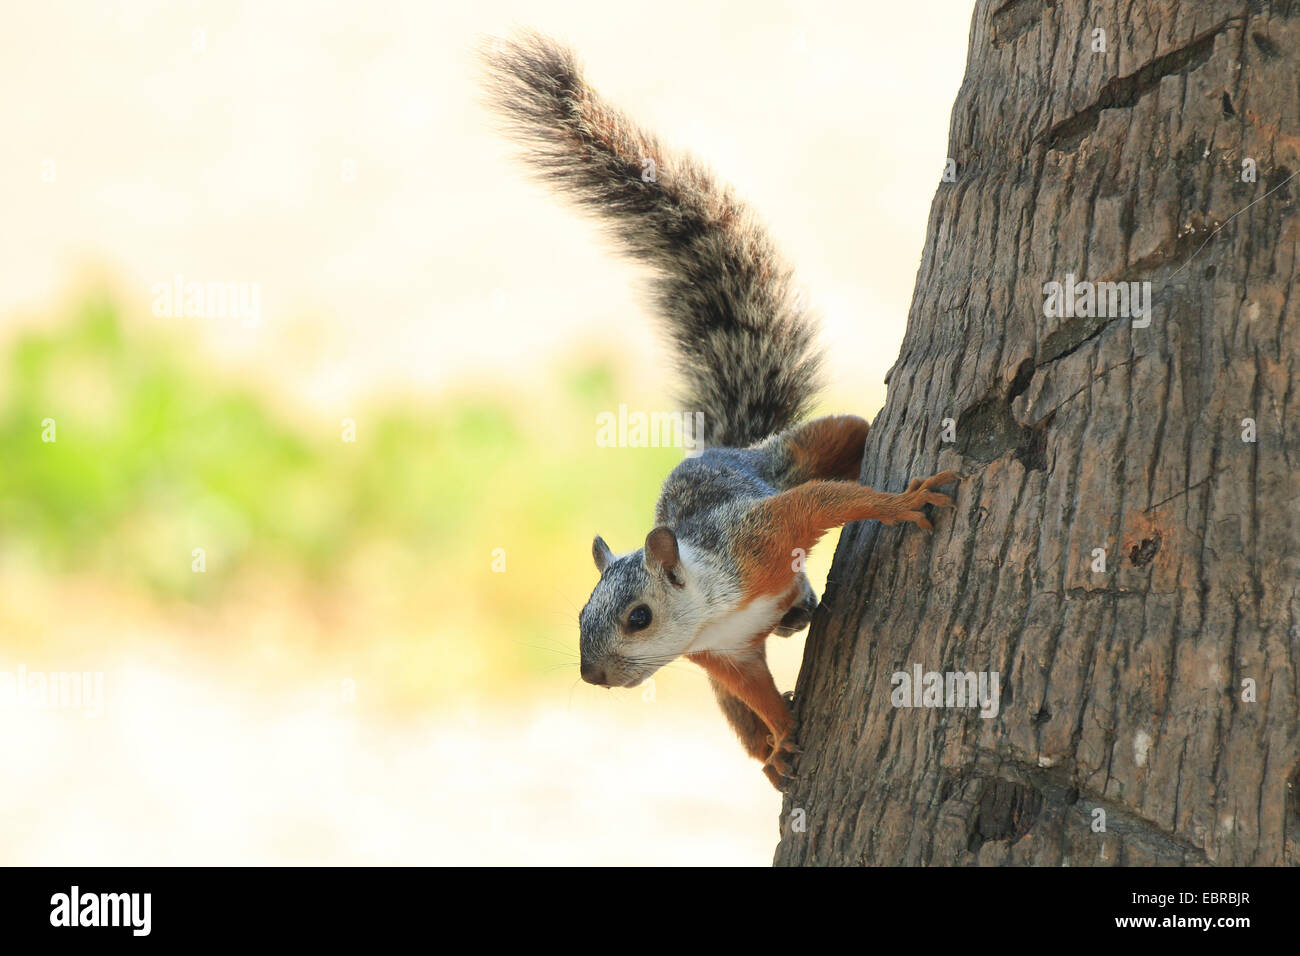 Variegated squirrel (Sciurus variegatoides), on the trunk of a coconut palm, Costa Rica Stock Photo